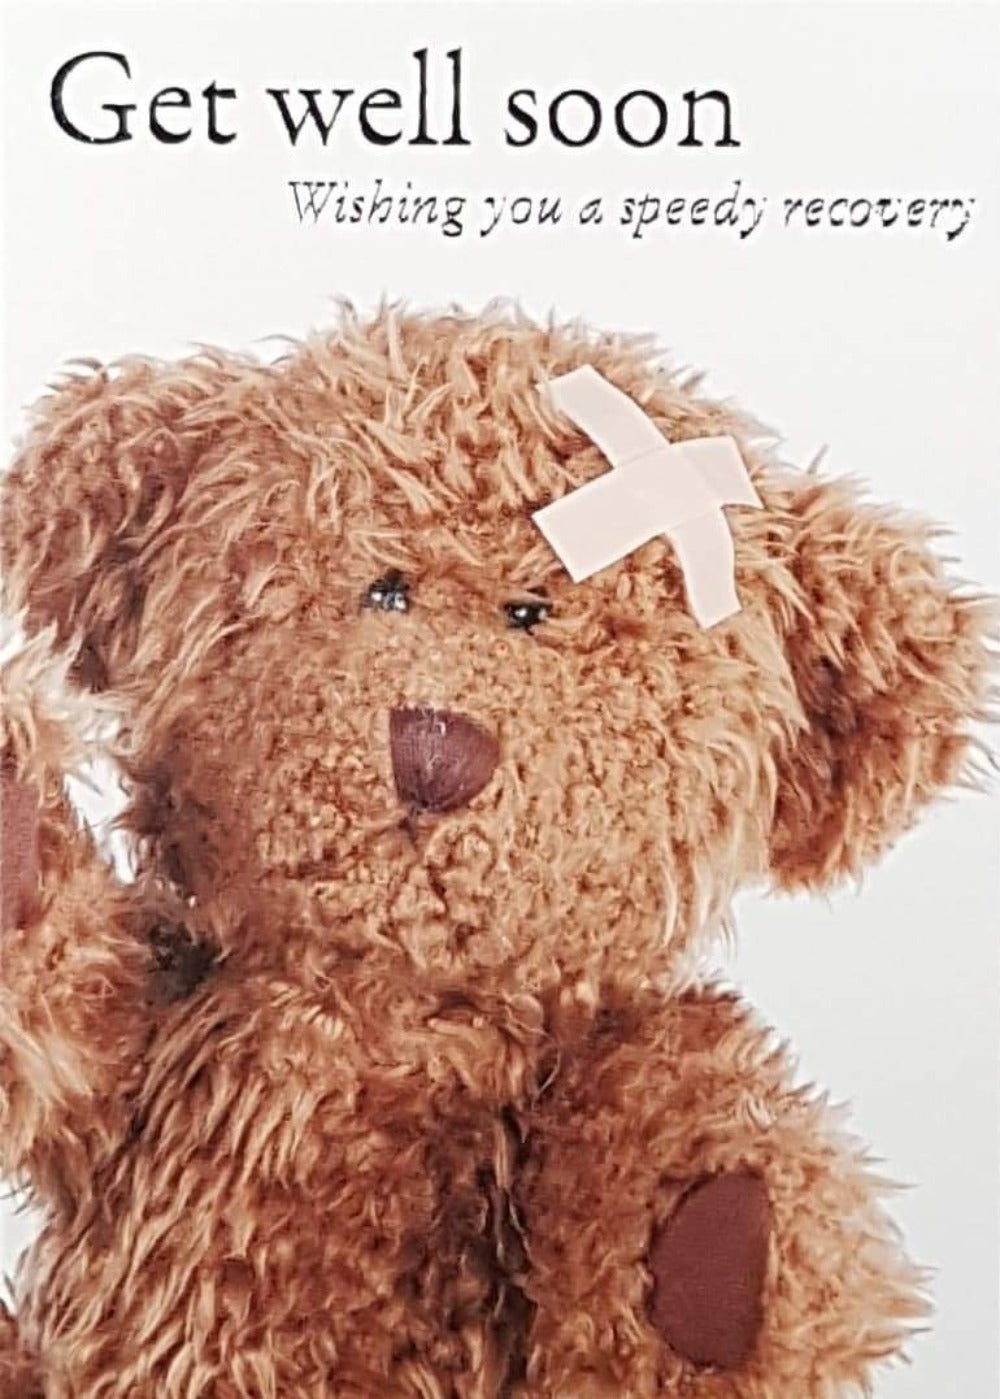 Get Well Card - A Soft Teddy With A Plaster On His Head